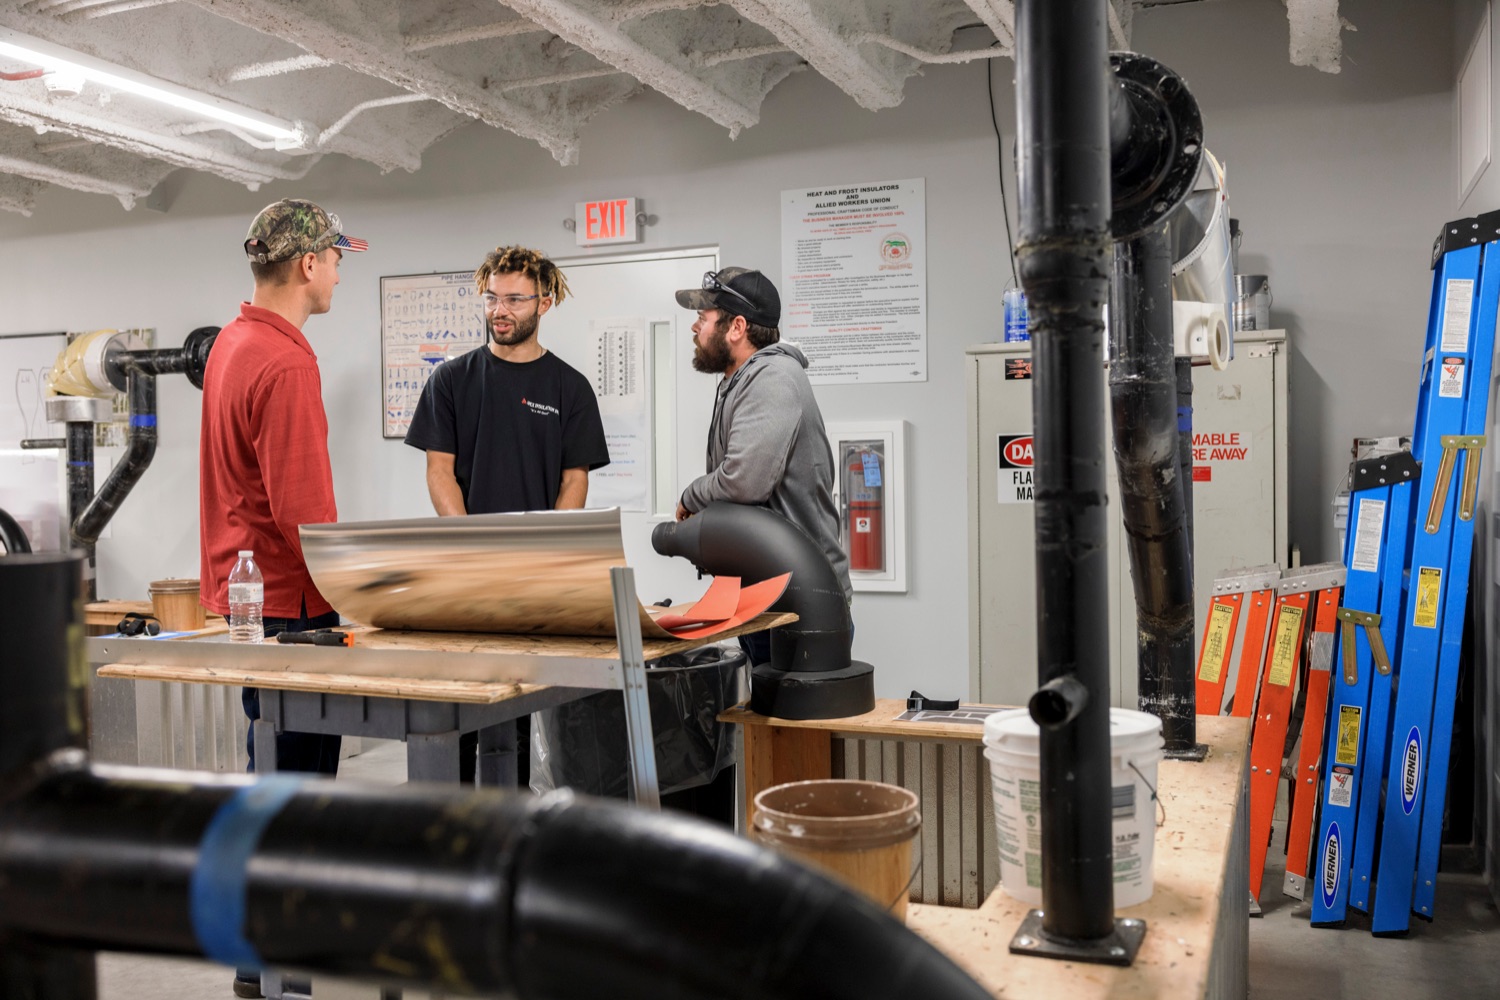 From left; Anthony Ferguson, a part time instructor at Heat and Frost Insulators Local 23; Anthony Riddick, 24, and Josh Schegan, 35, look at layouts for pipe insulation following a press conference which kicked off National Apprenticeship Week with a visit to Heat and Frost Insulators Local 23, a training center in Dauphin County, on Monday, November 14, 2022. National Apprenticeship Week (NAW) is a nationwide celebration for industry, labor, equity, workforce, education and government leaders to showcase the successes and value of registered apprenticeship for building our economy, advancing racial and gender equity, and supporting underserved communities.<br><a href="https://filesource.amperwave.net/commonwealthofpa/photo/22344_li_apprenticeshipweek_NK_004.JPG" target="_blank">⇣ Download Photo</a>